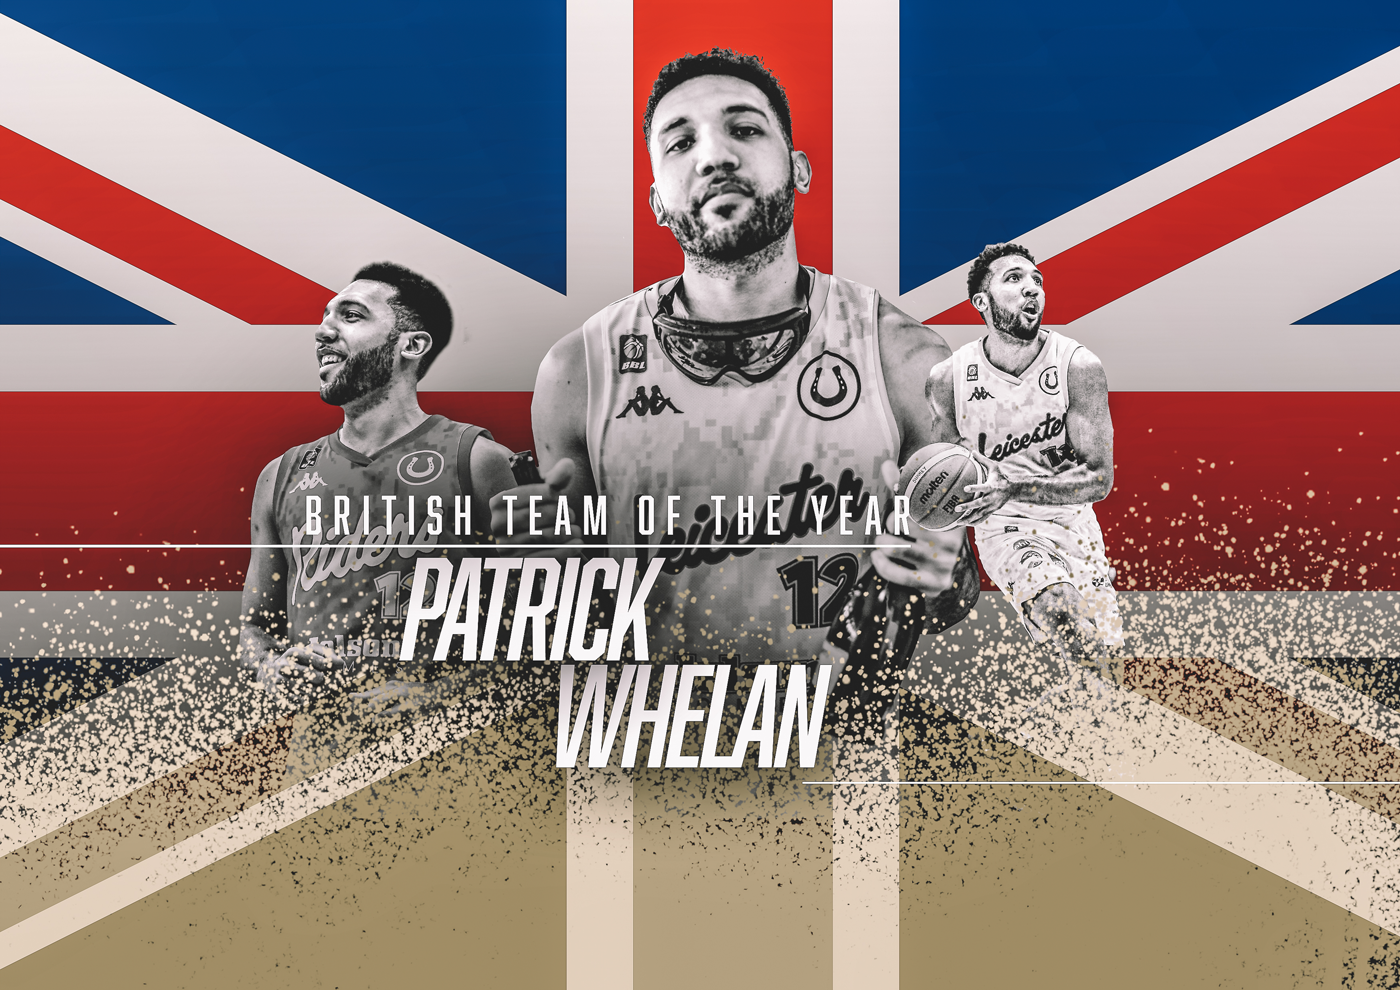 Whelan named in BBL British Team of the Year!